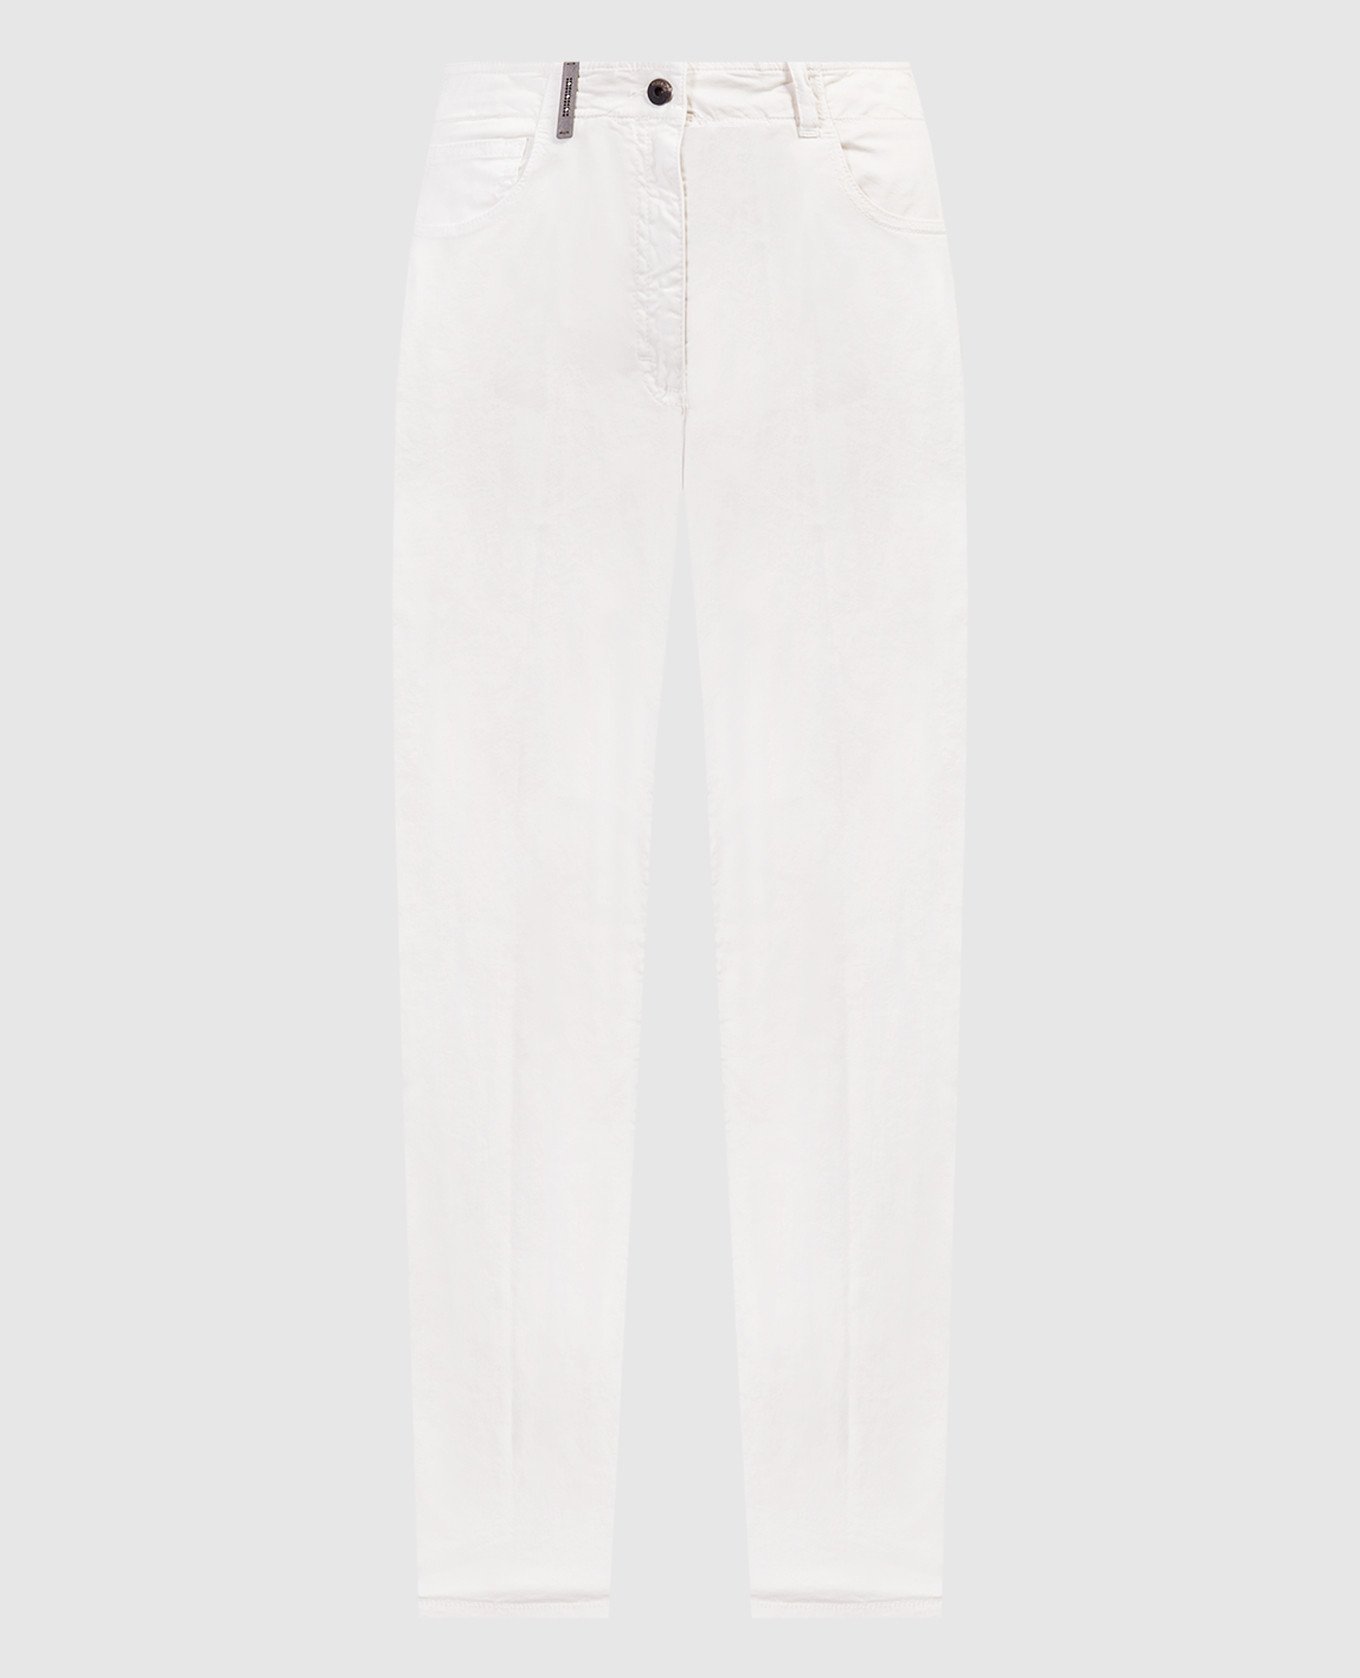 Beige pants with a logo